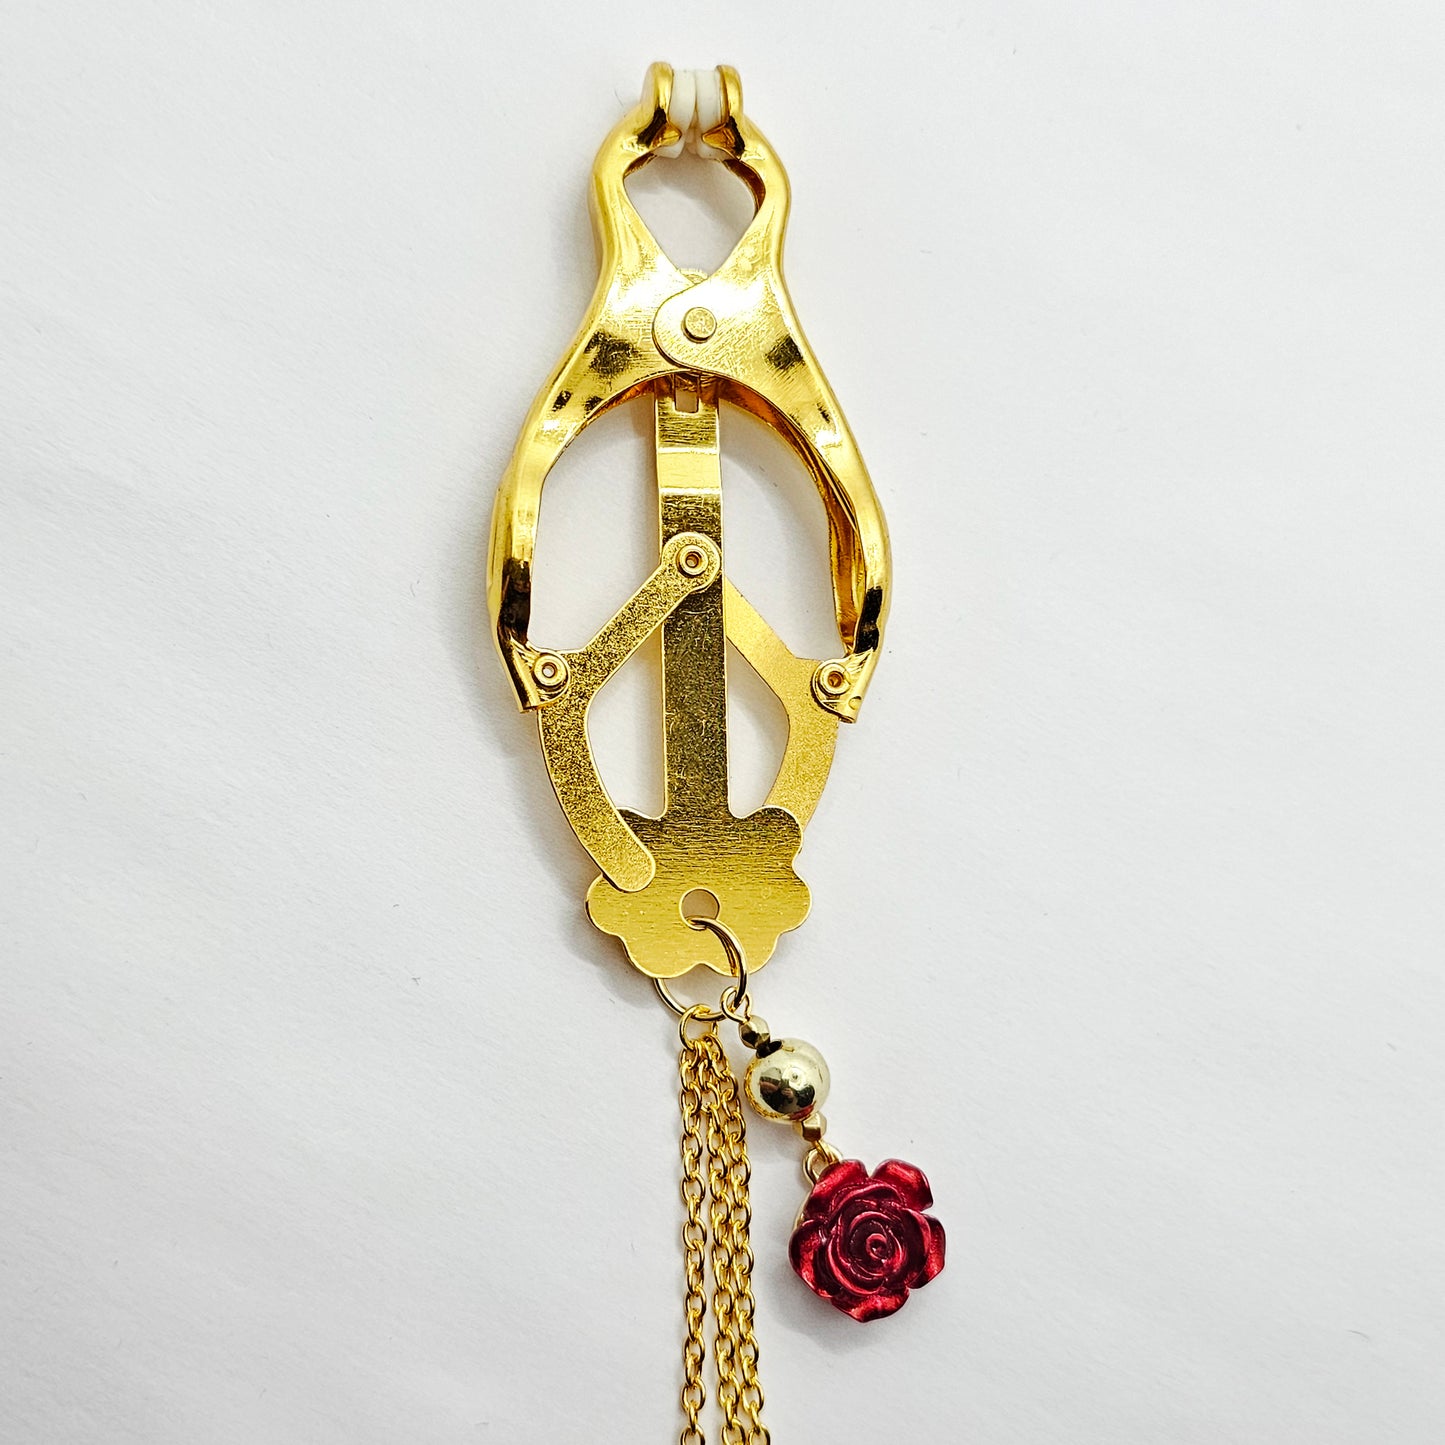 Gold Clover Clamps with Multi Chains Attached and Red Roses.